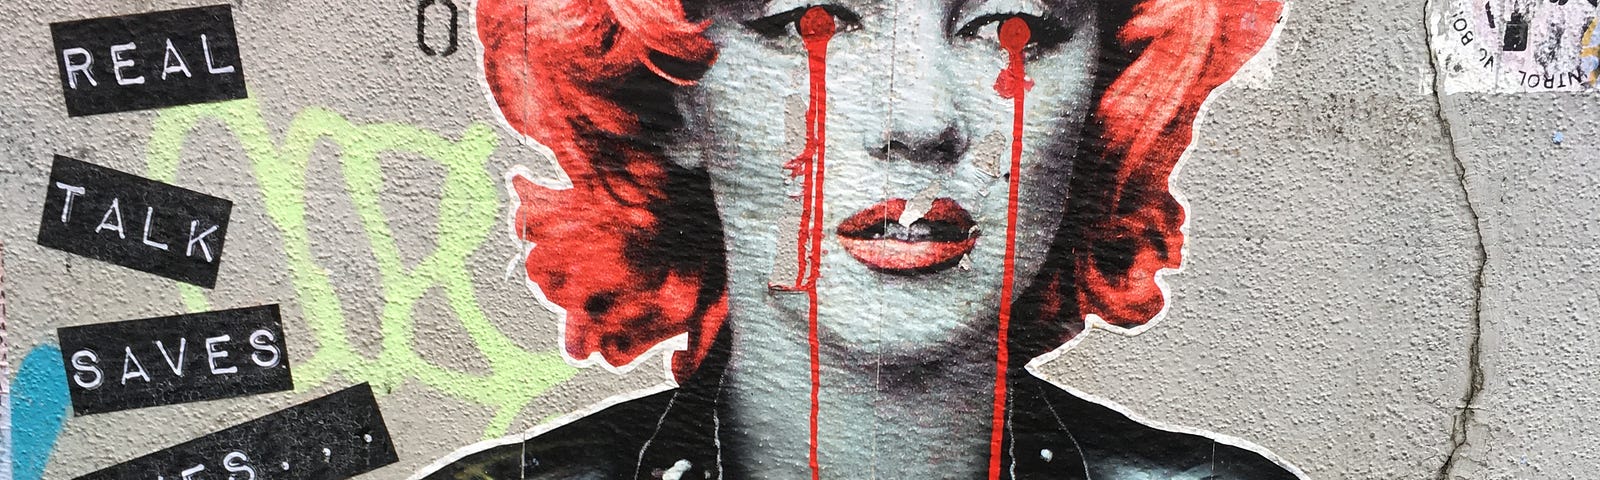 Graffitti wall of Marilyn Monroe with red tears running down her face. With words “Real Ralk Saves Lives”.